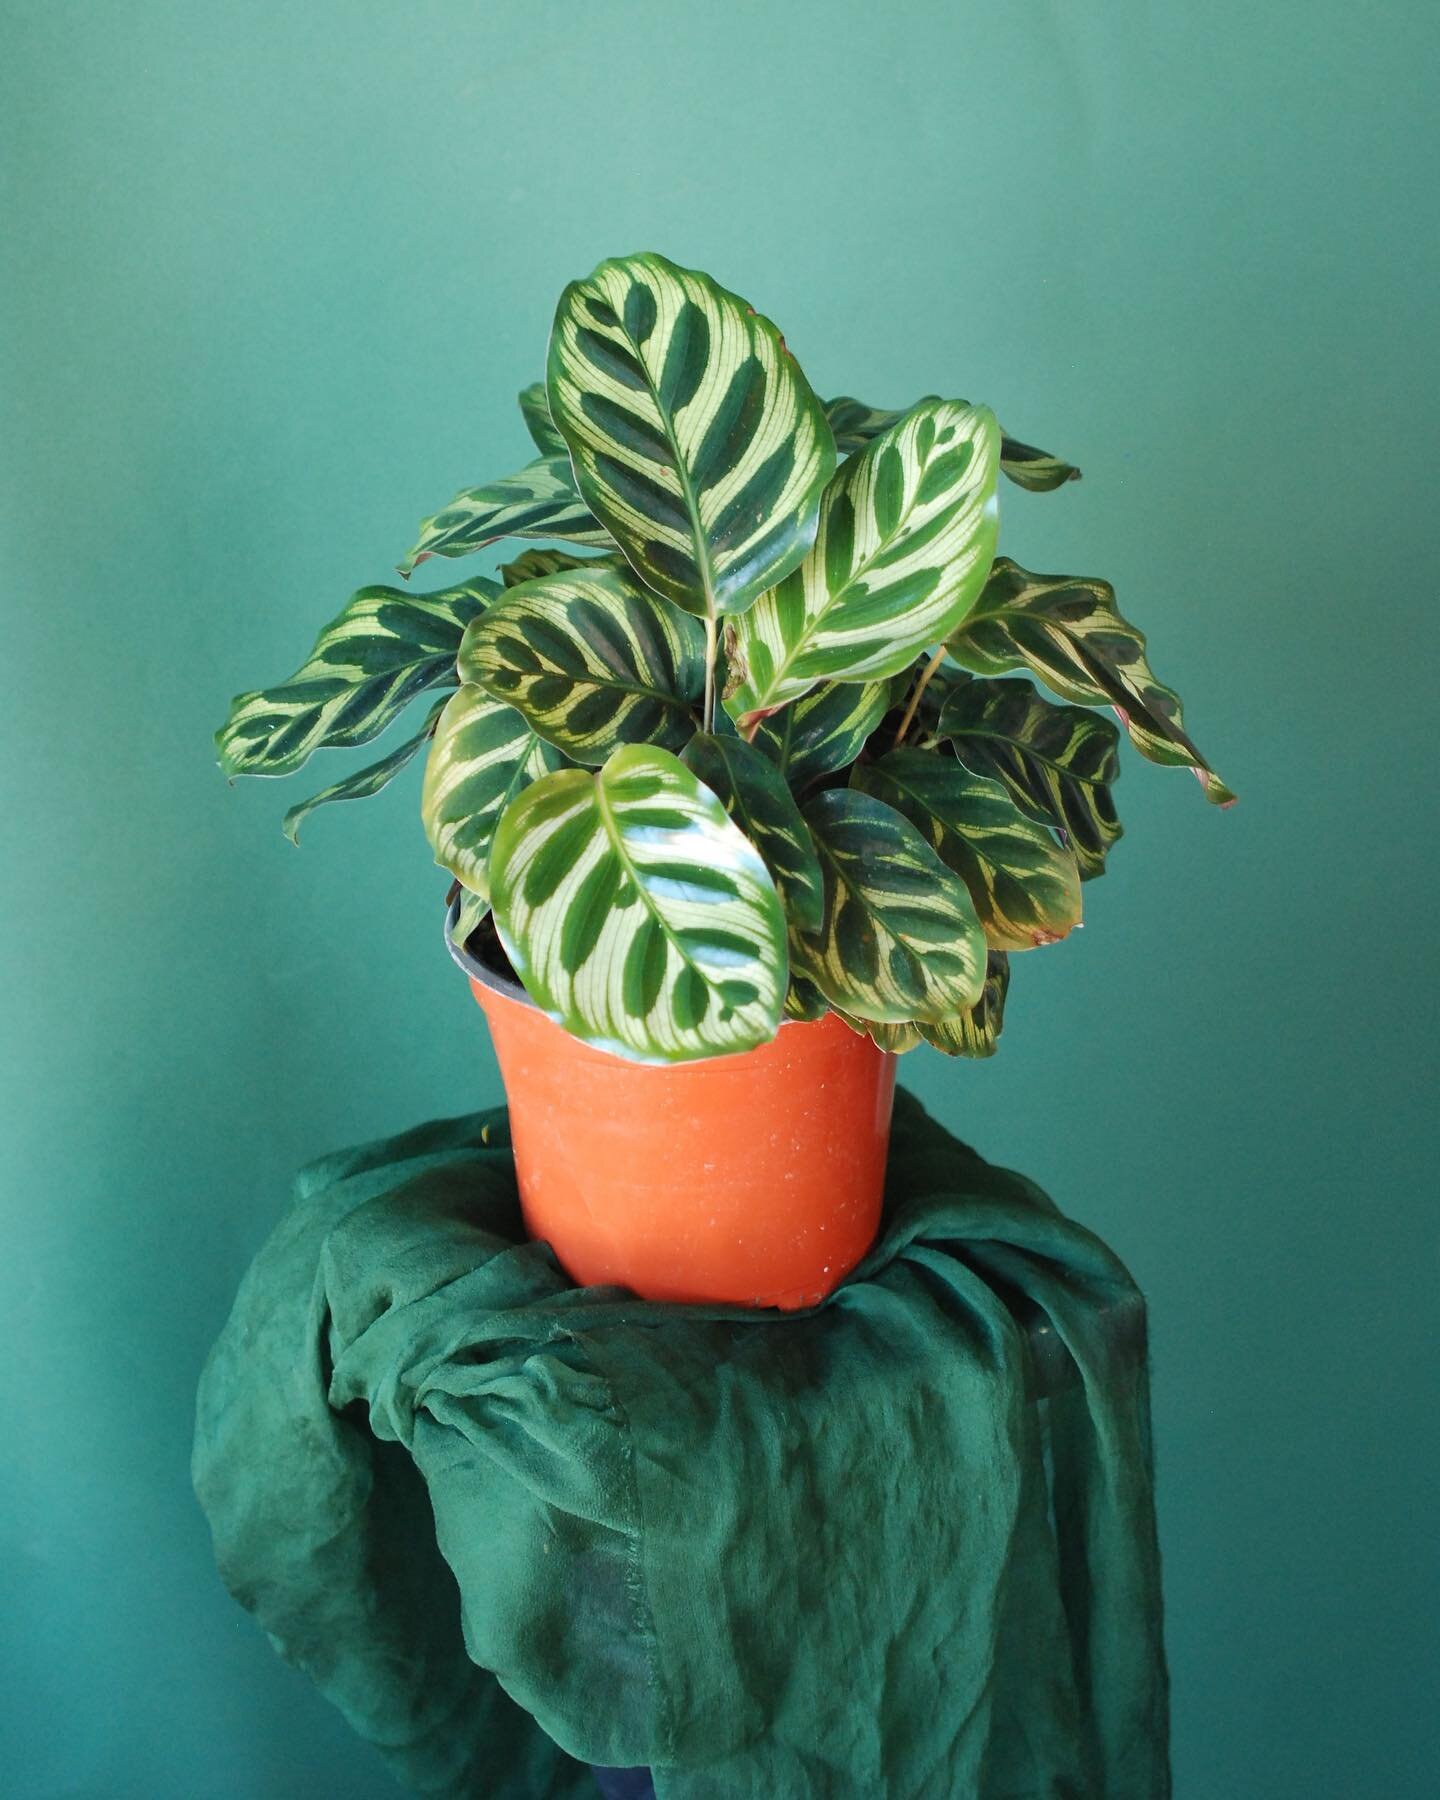 Come by and check out all the cute Calathea varieties we have in shop! These beauties come in all shapes, colors, and sizes offering something for everyone.🌿